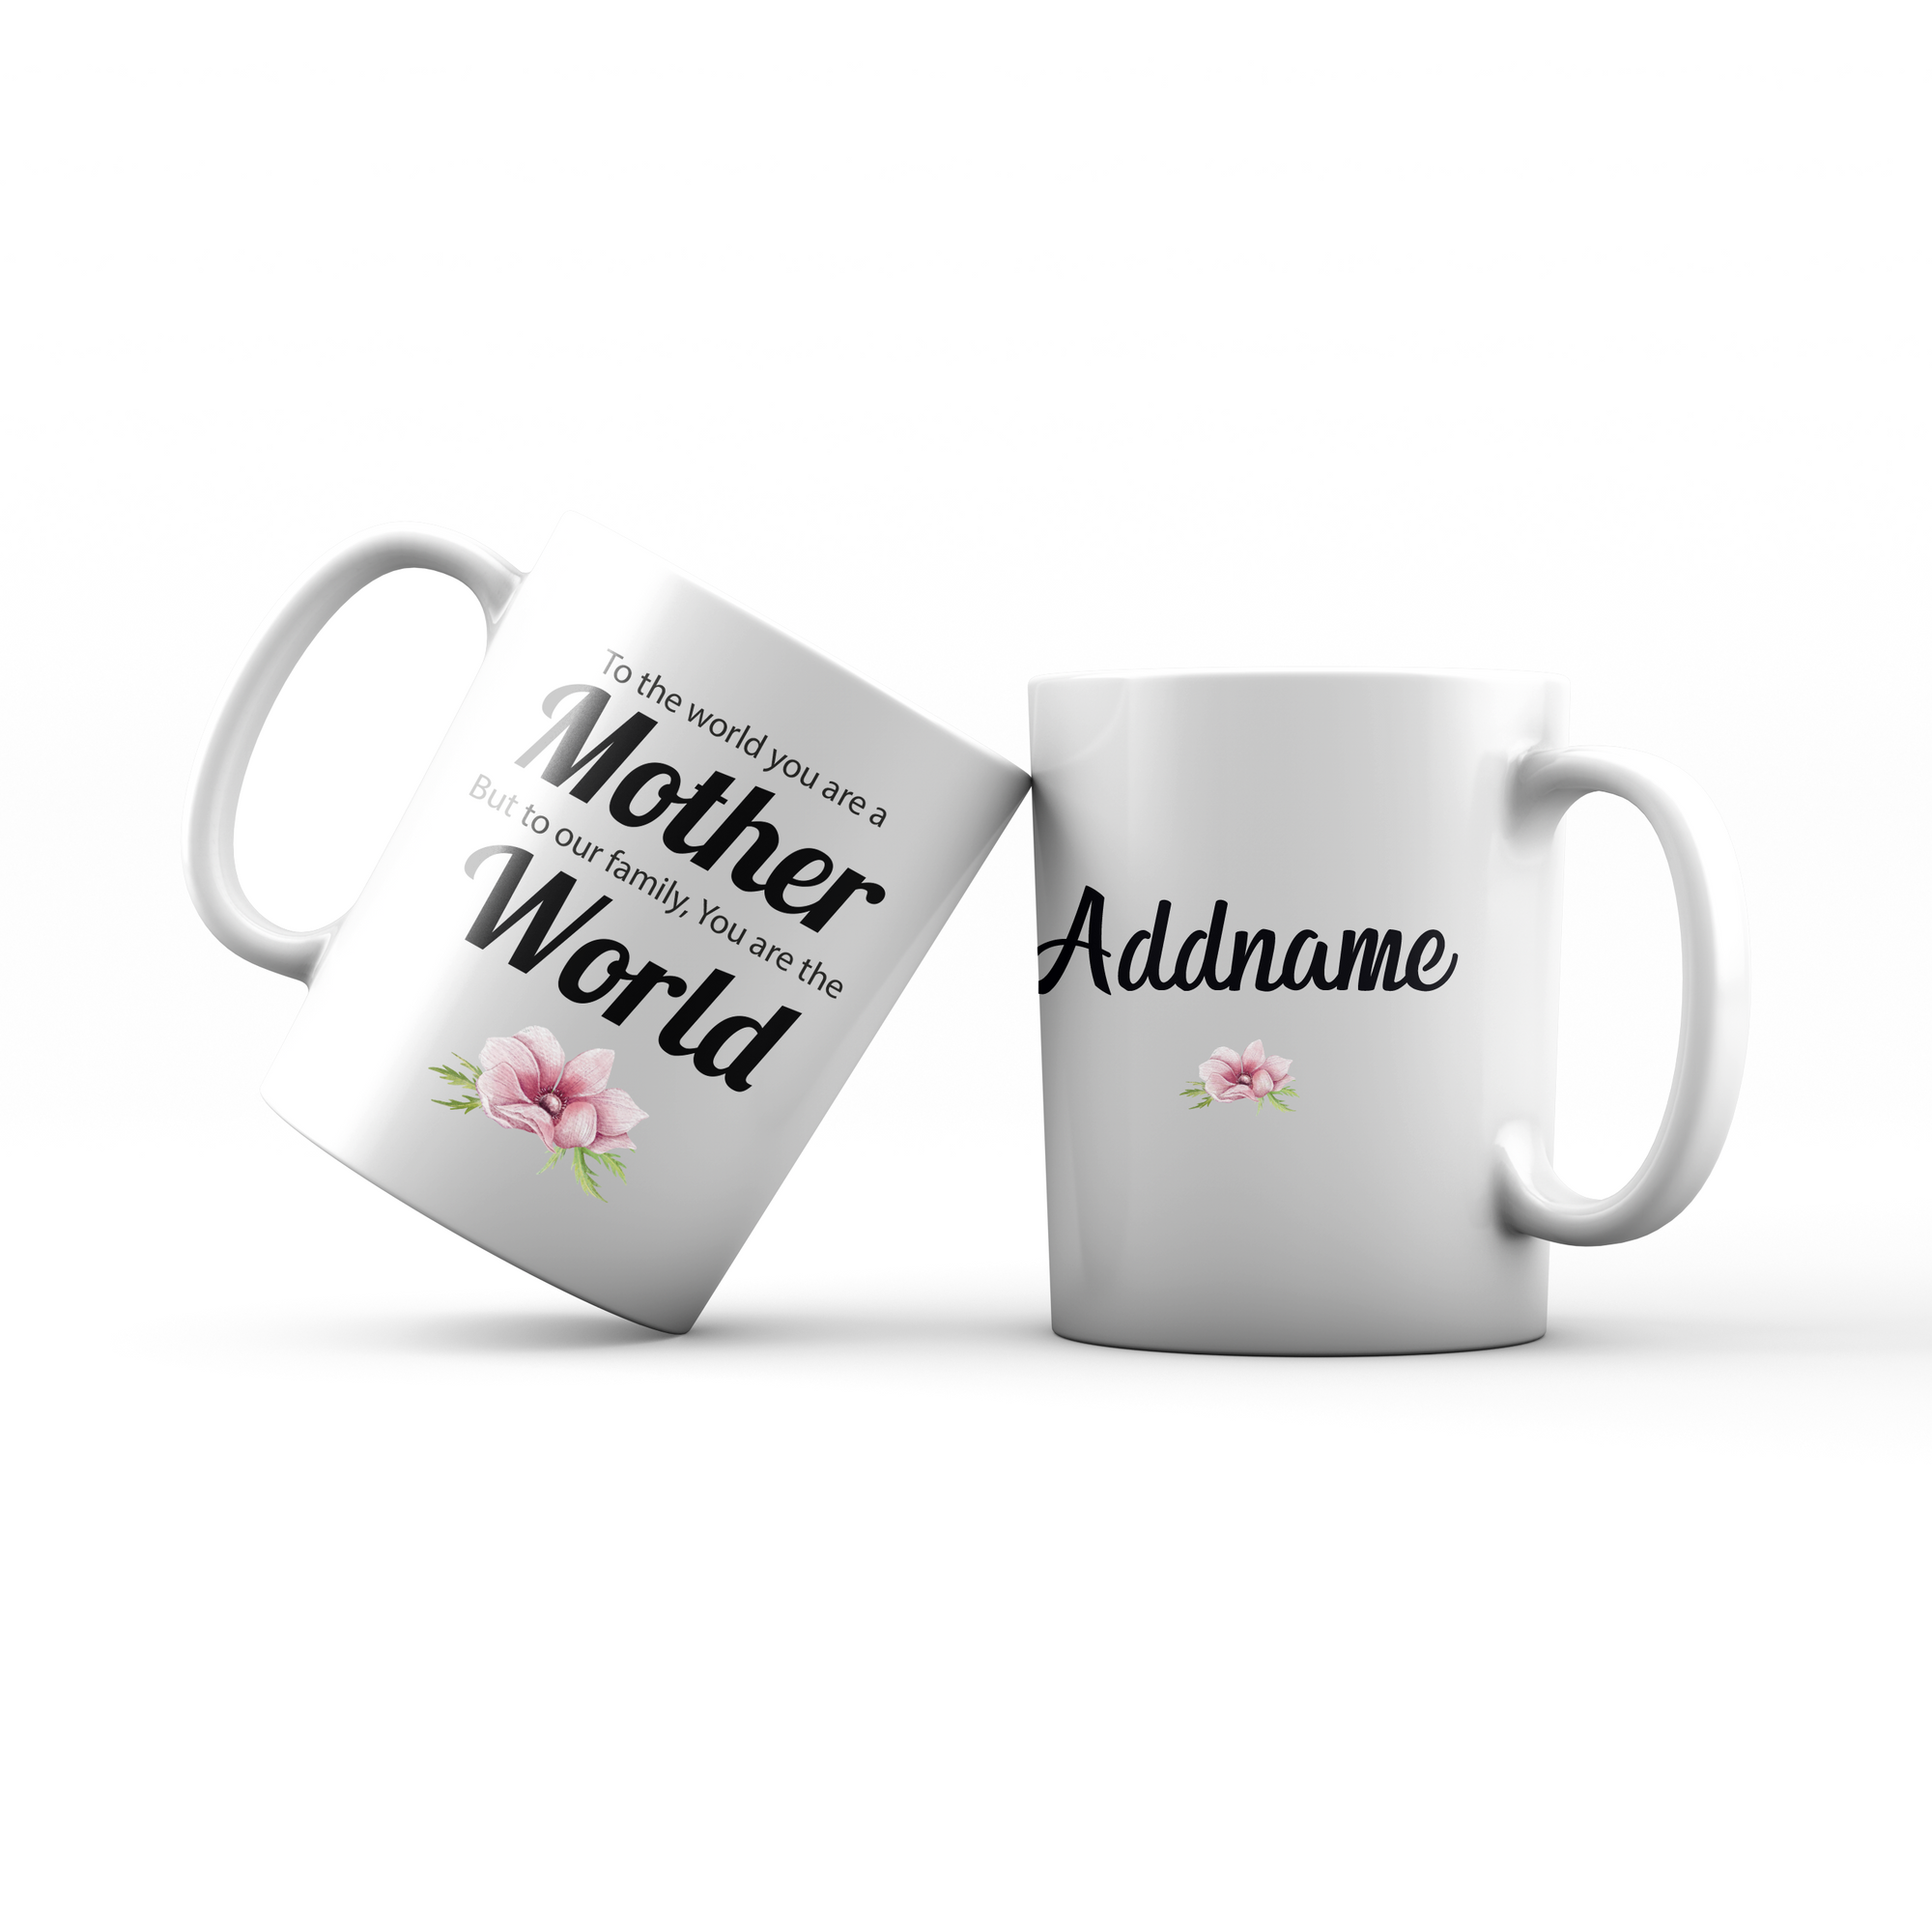 Sweet Mom Quotes 1 To The World You Are A Mother But To Our Family, You Are The World Addname Mug